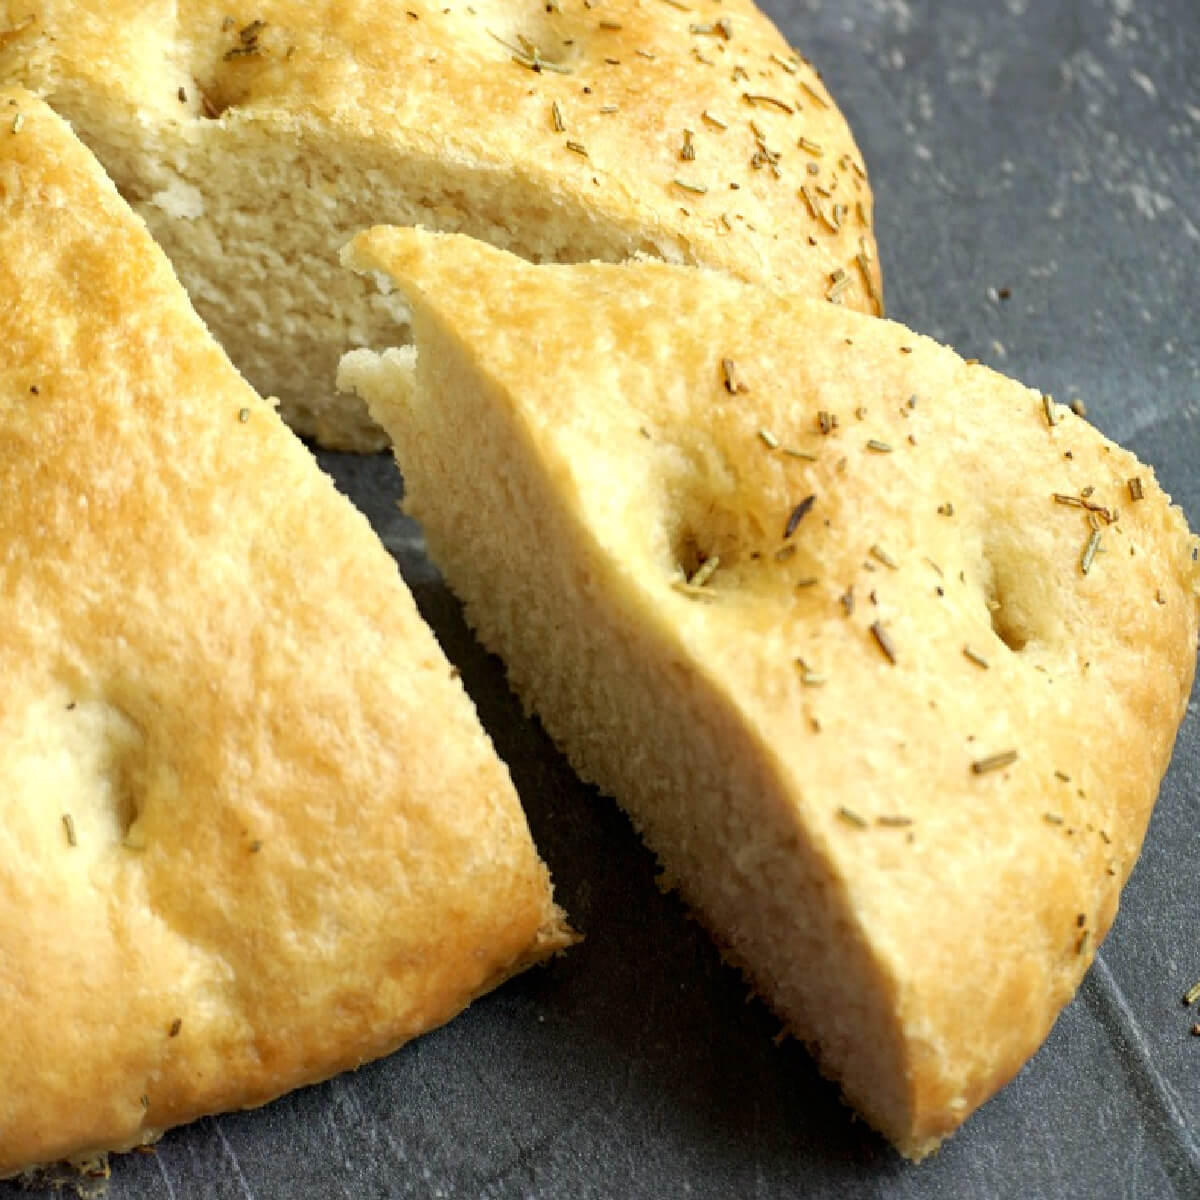 A slice of focaccia bread cut out of the loaf